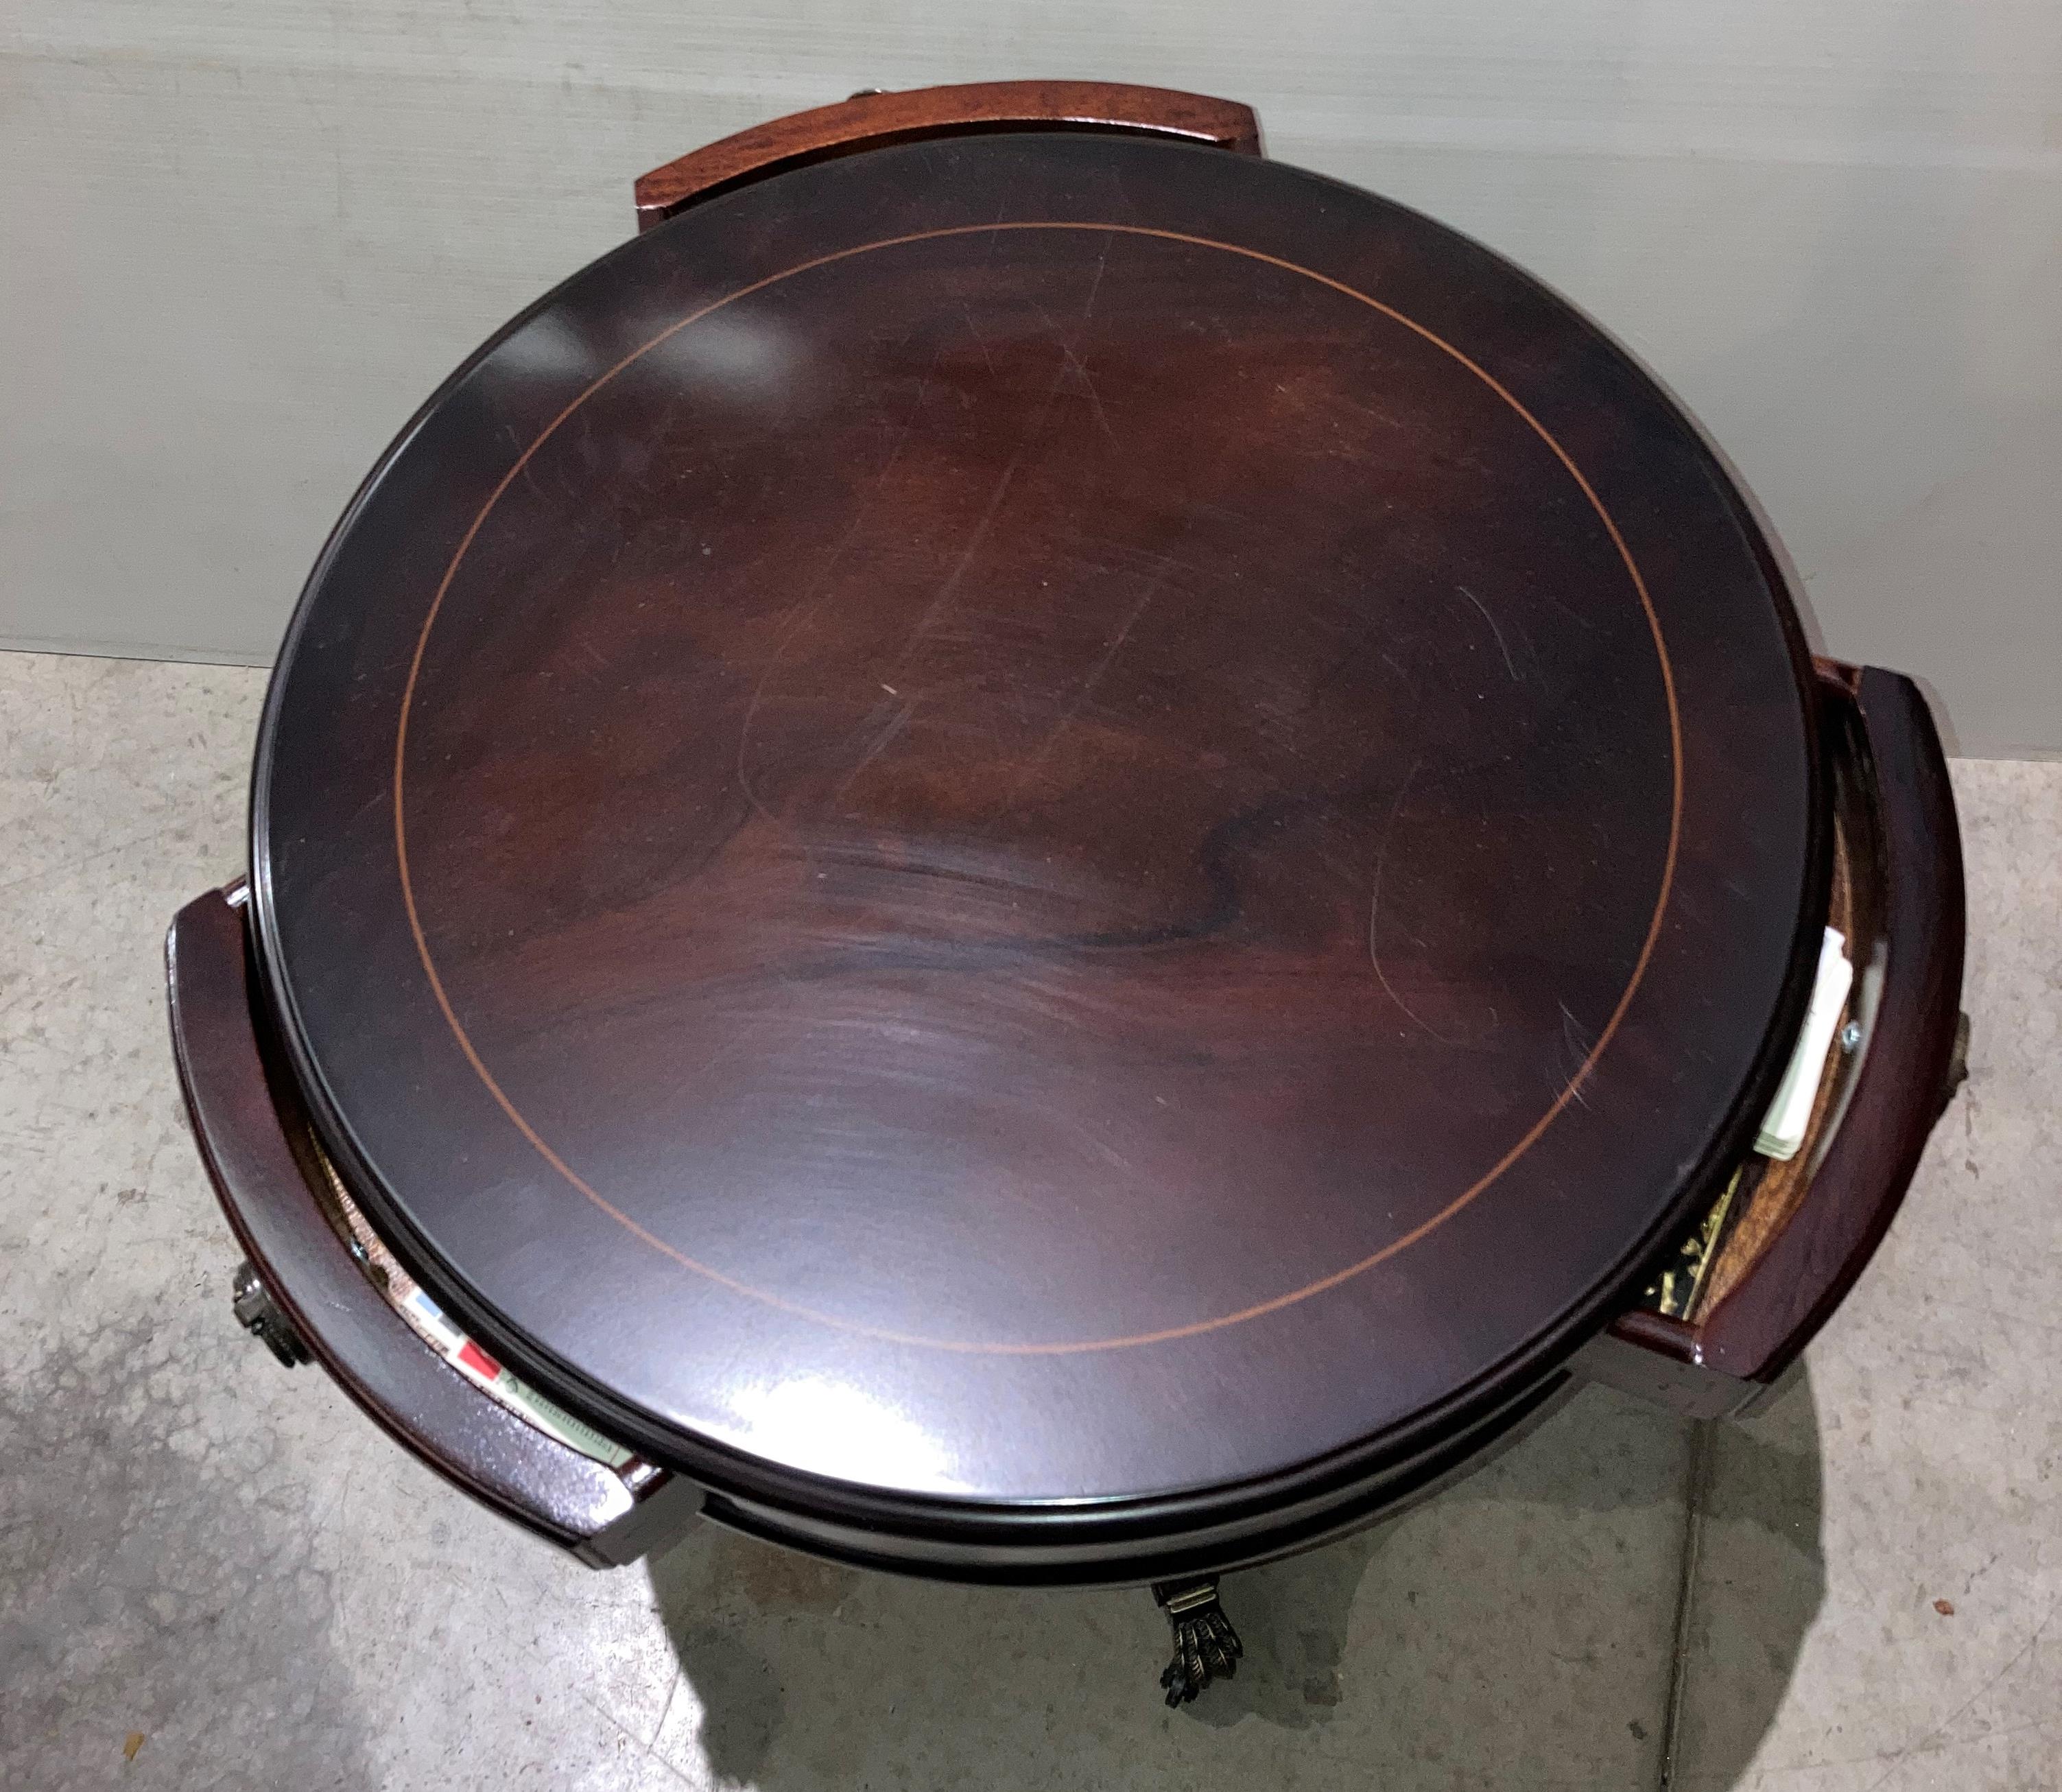 Mahogany finish drum side table with four drawers, - Image 2 of 2